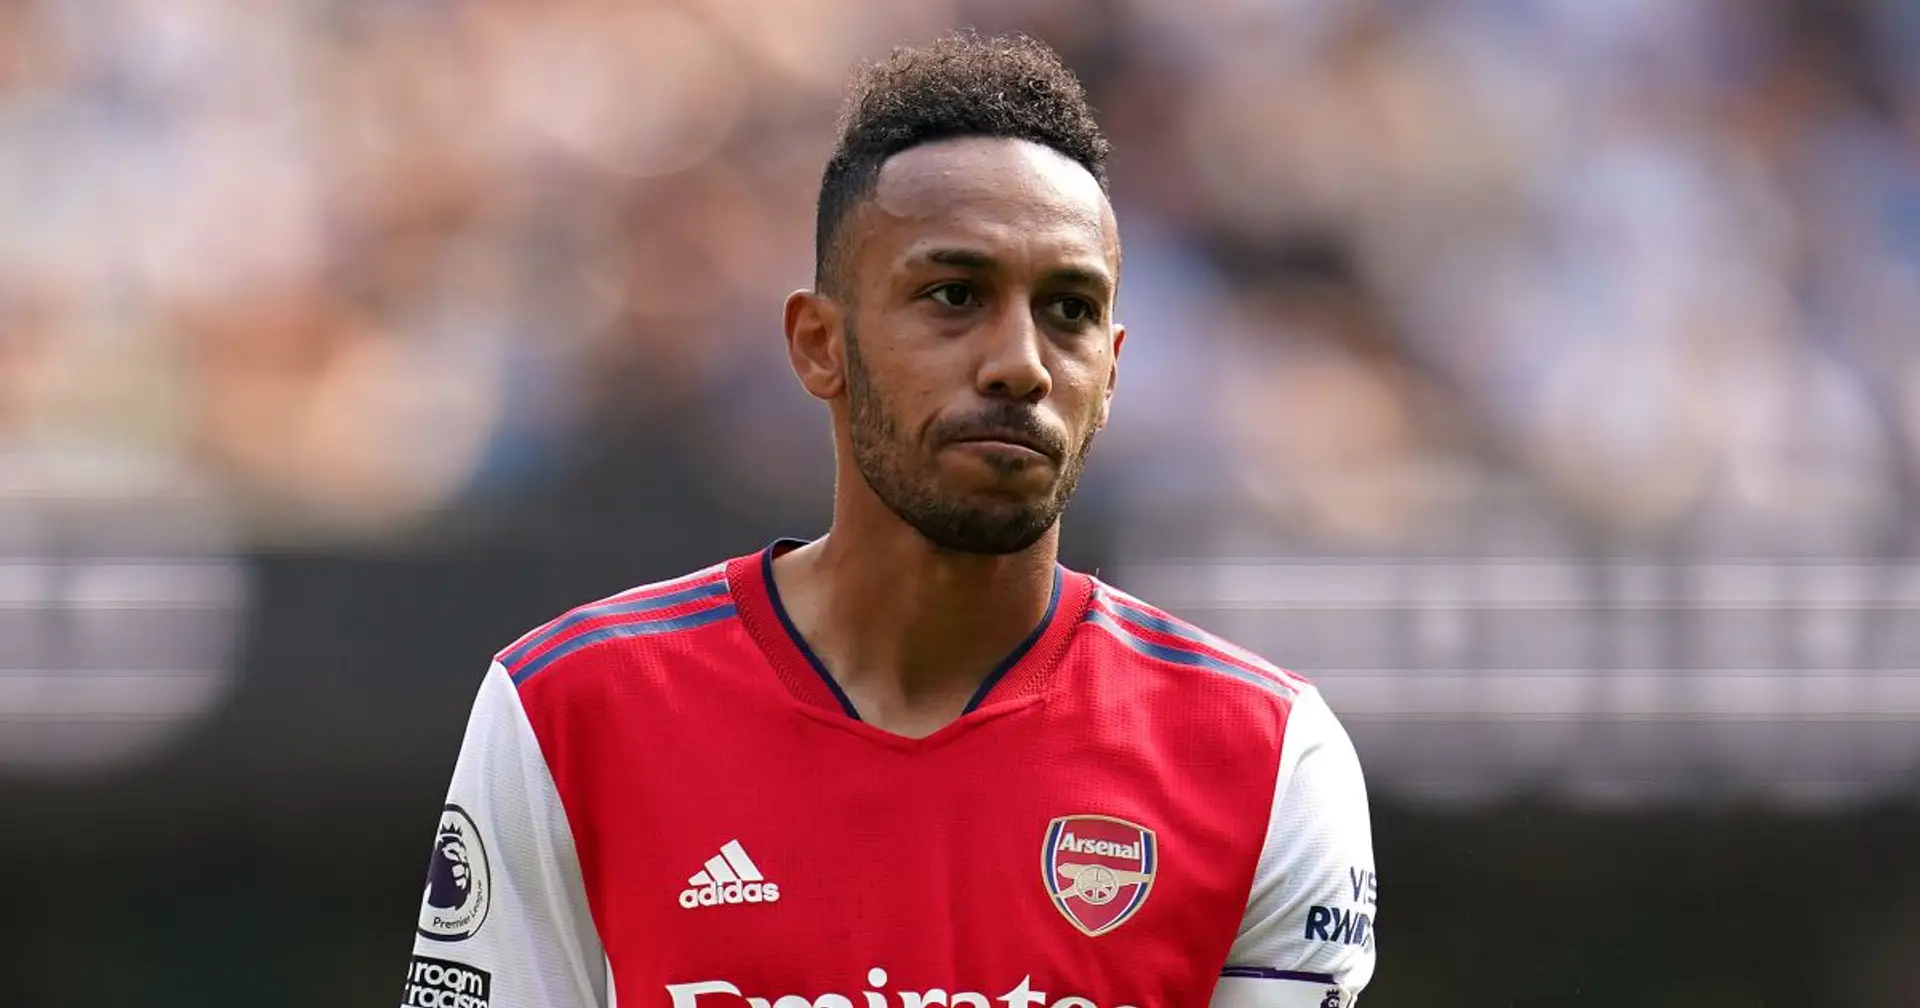 Pierre-Emerick Aubameyang's agent makes dig at Arsenal in wake of his captaincy strip